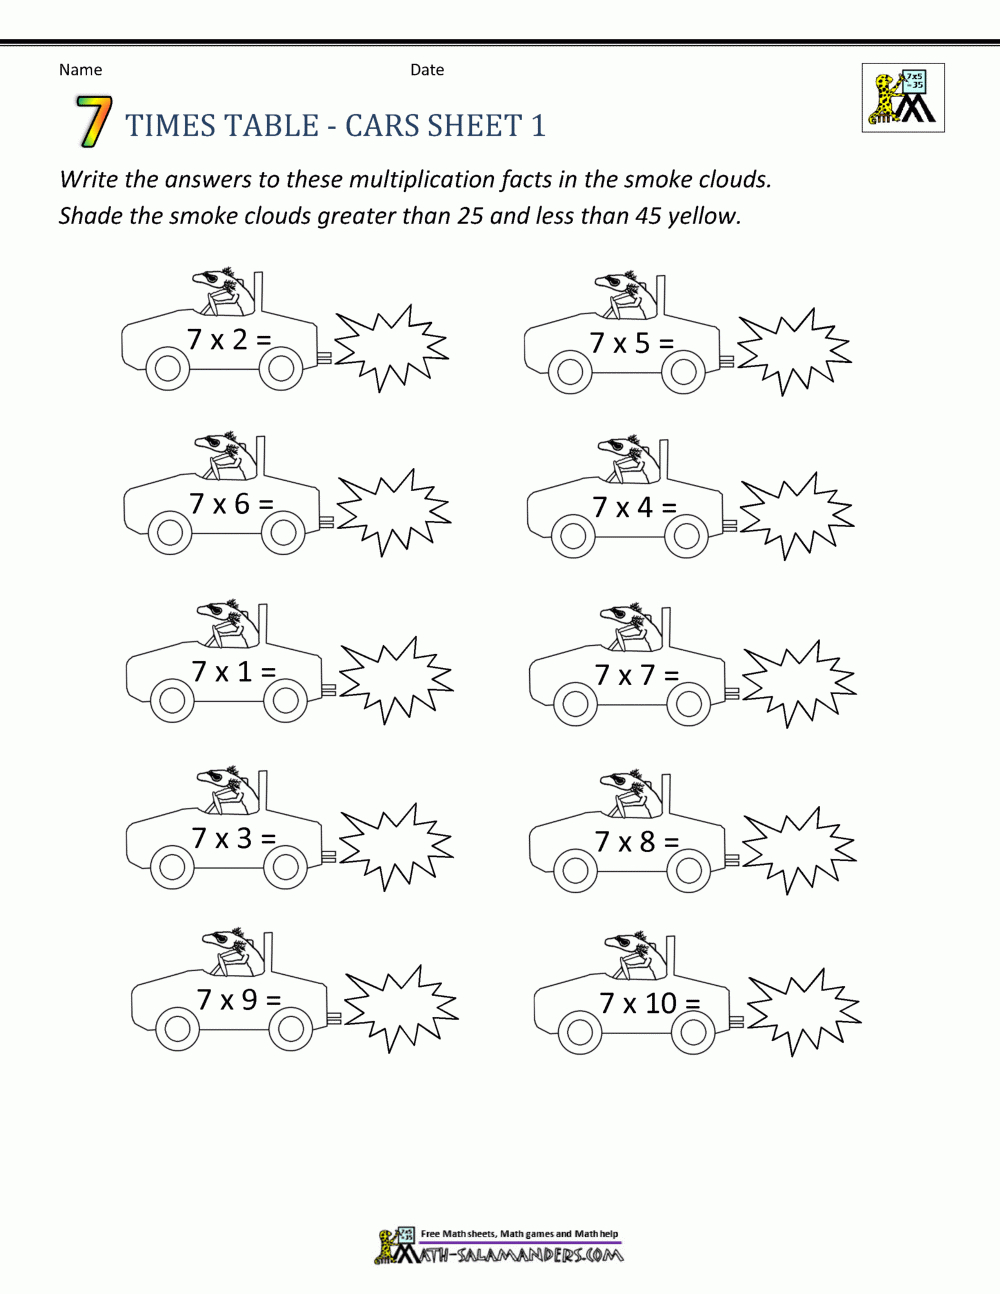 Free Times Table Worksheets - 7 Times Table throughout Multiplication Worksheets 7 Times Tables